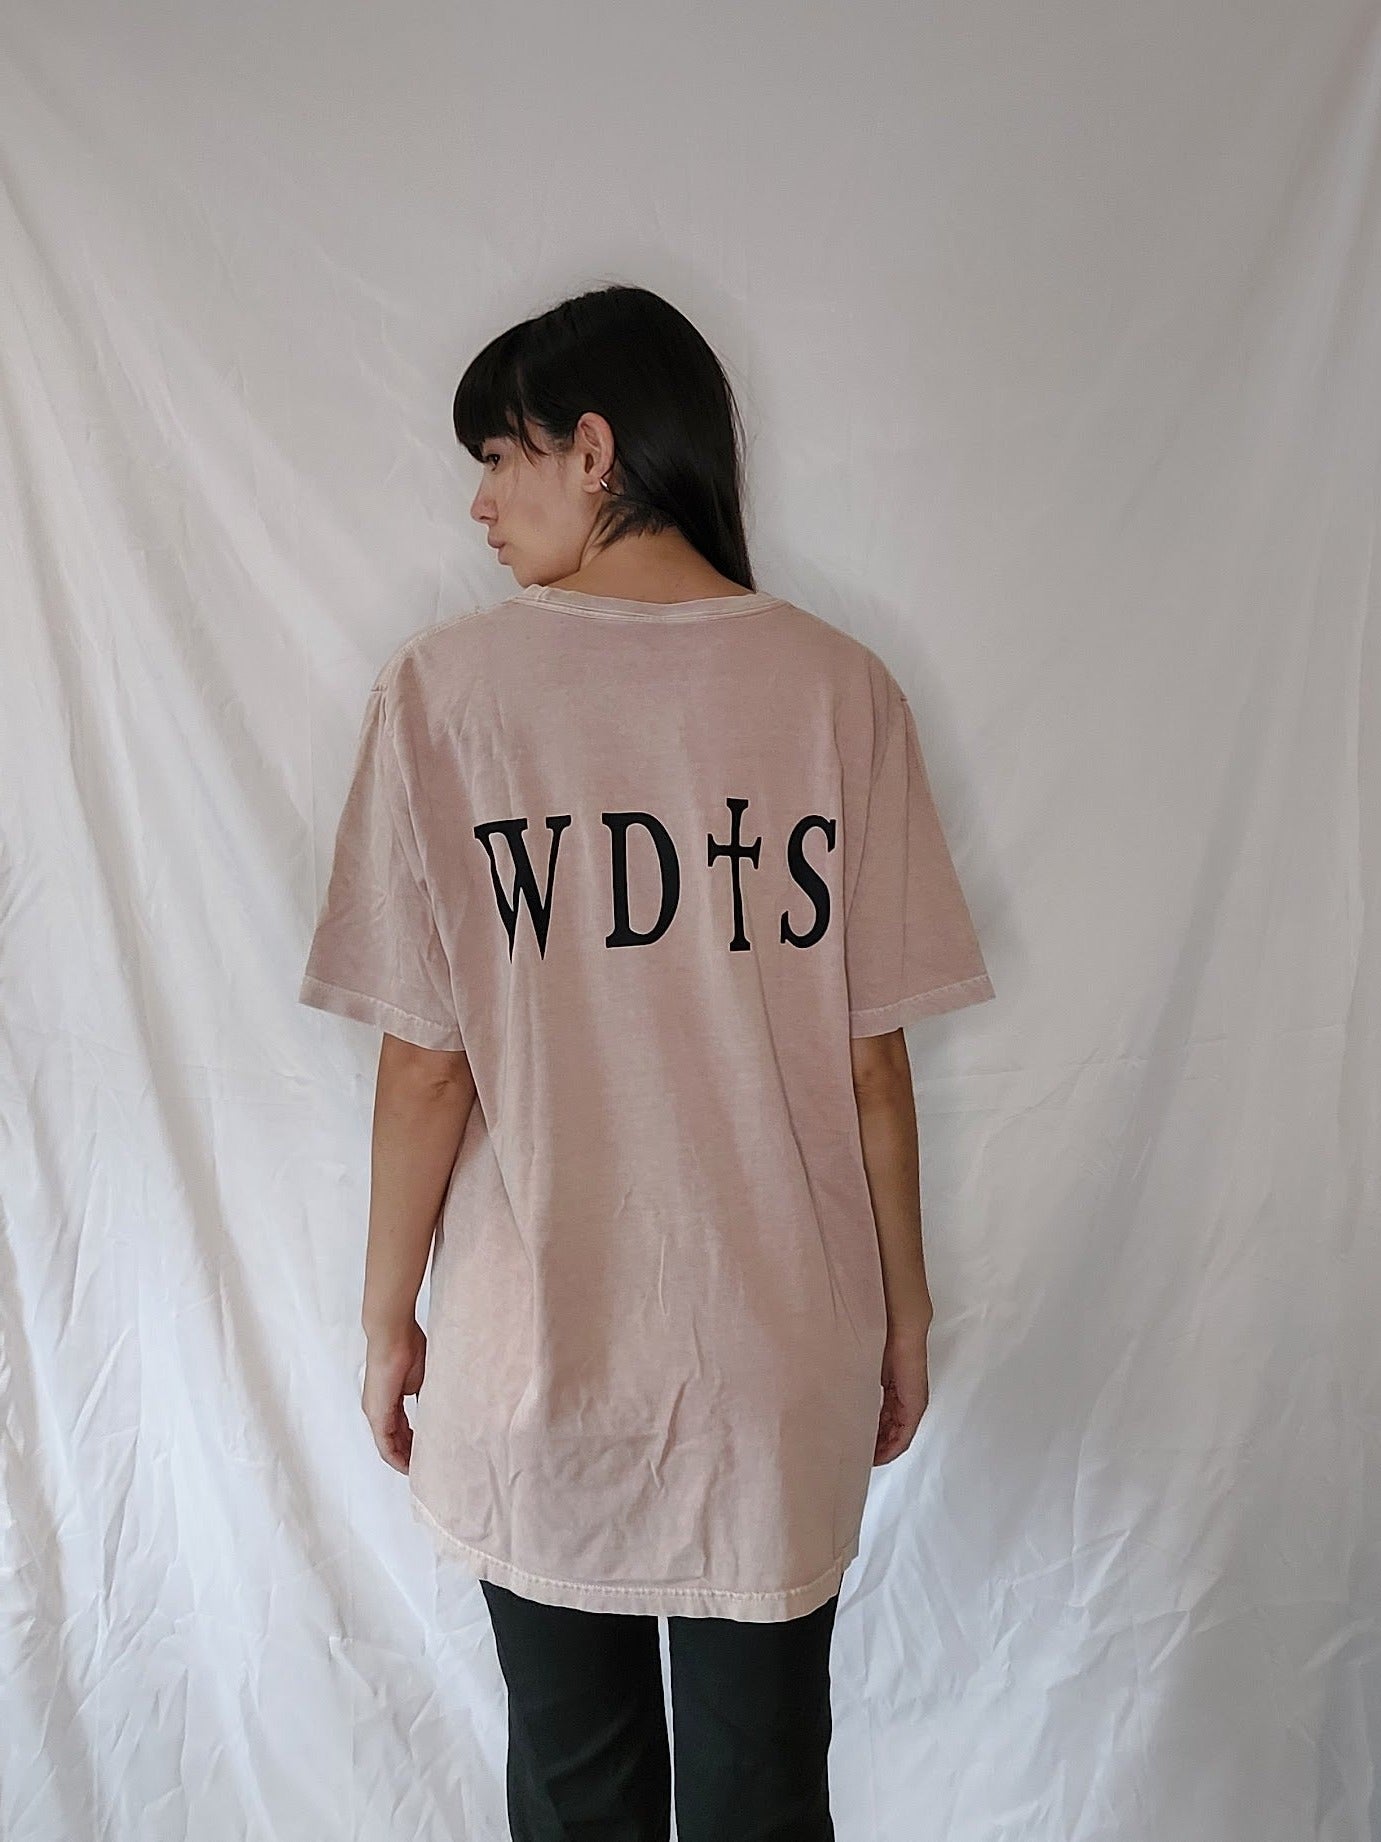 WDTS Heavyweight T-SHIRT GARMENT DYED DUSTY ROSE